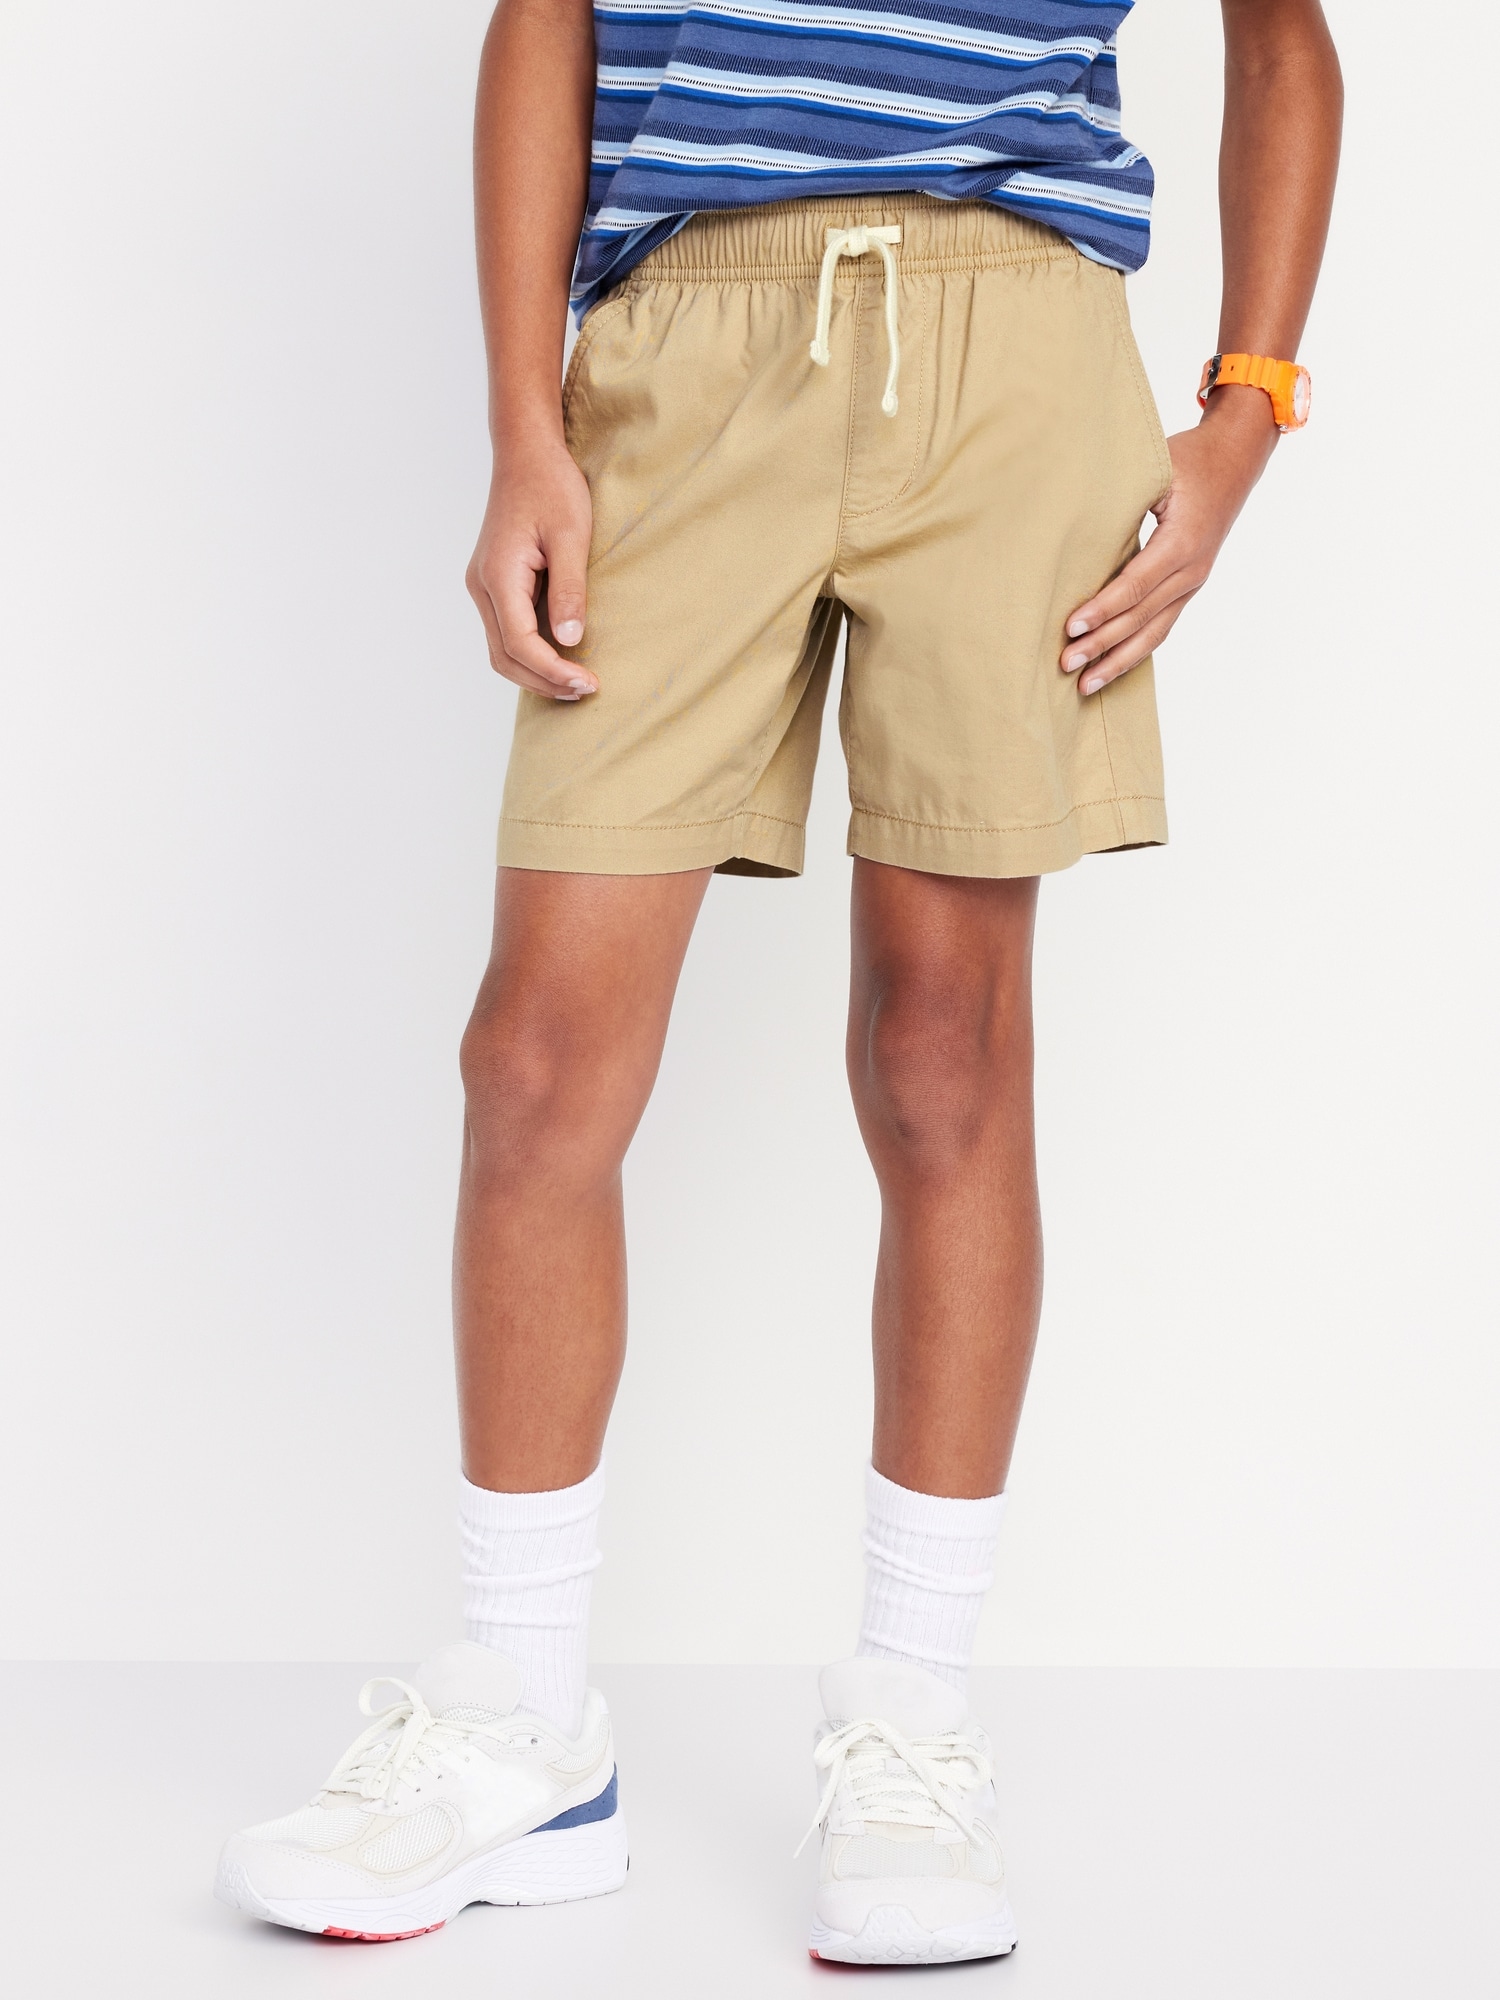 Twill Non-Stretch Jogger Shorts for Boys (Above Knee) Hot Deal